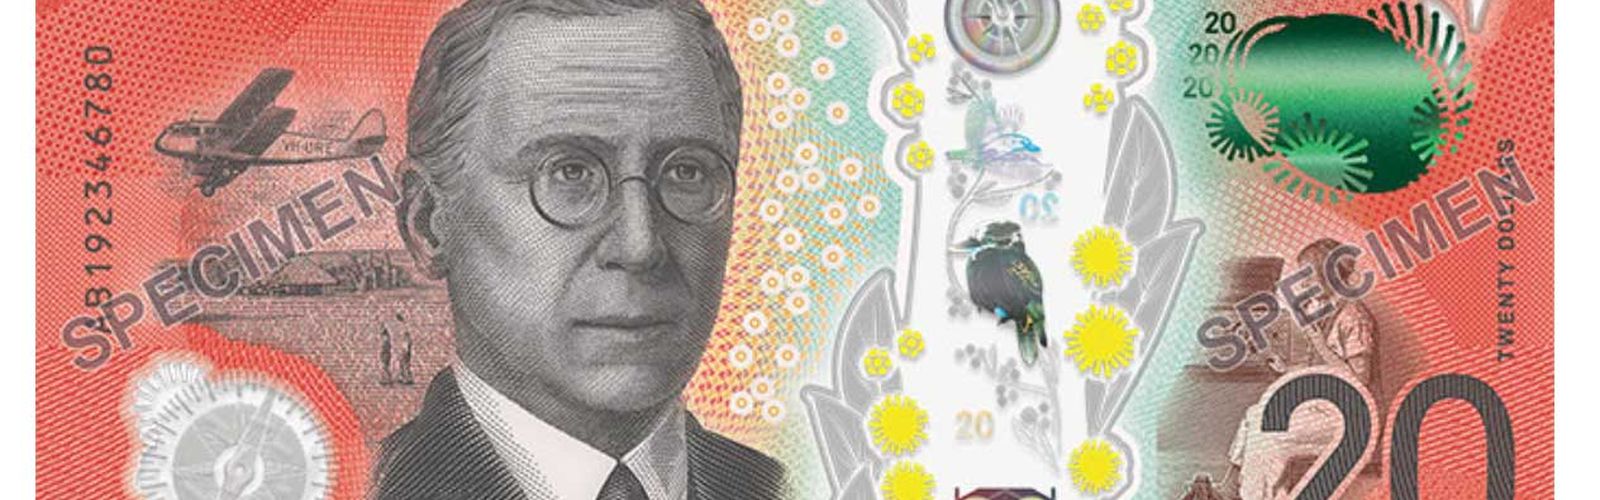 $20 note with John Flynn on it. 